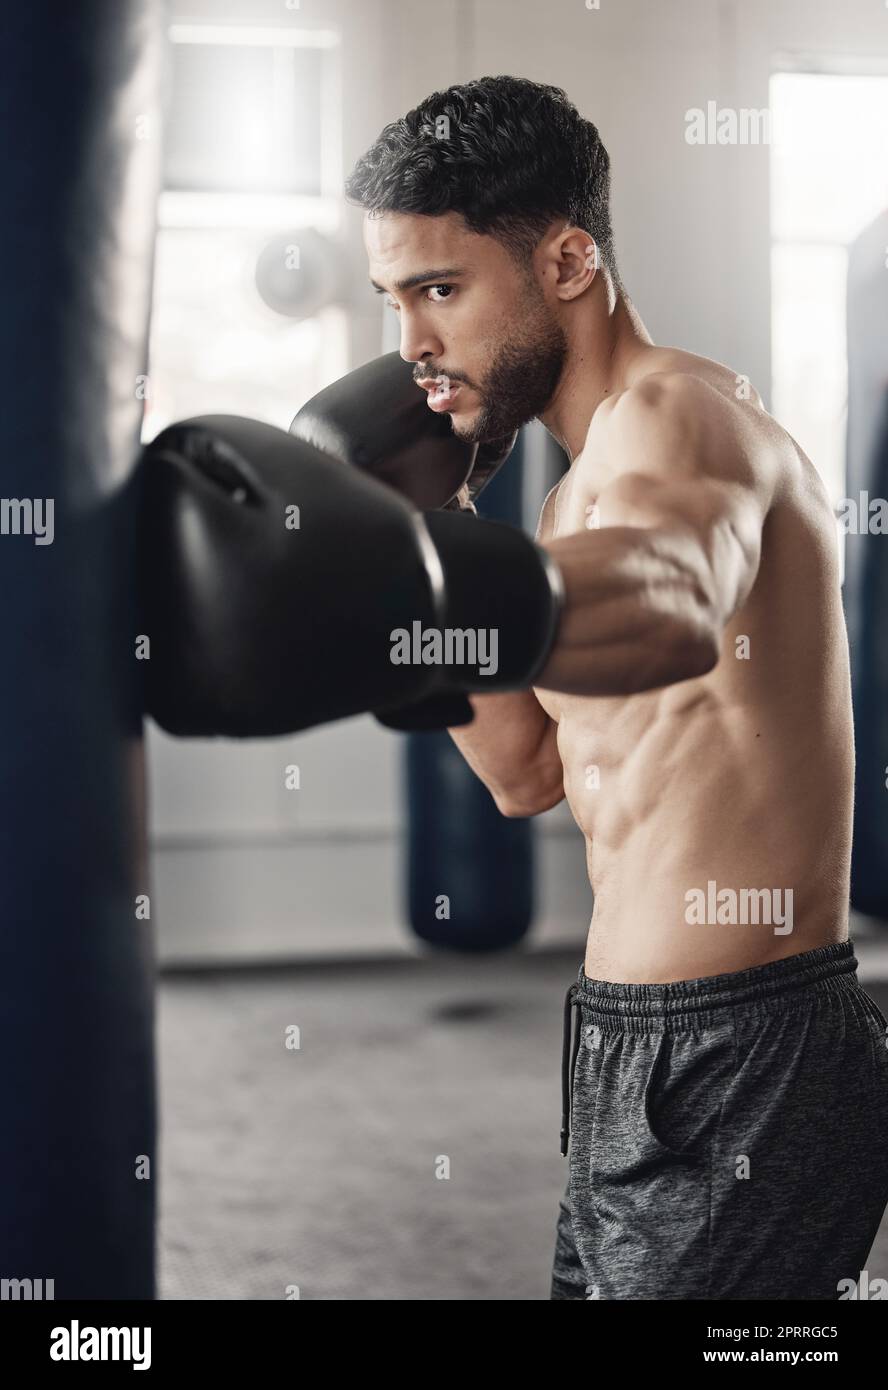 Punching bag, boxing and boxer man in workout training or exercise in a gym. Strong, powerful and serious athlete or personal trainer with fitness gear for muscle strength, wellness or health goals Stock Photo